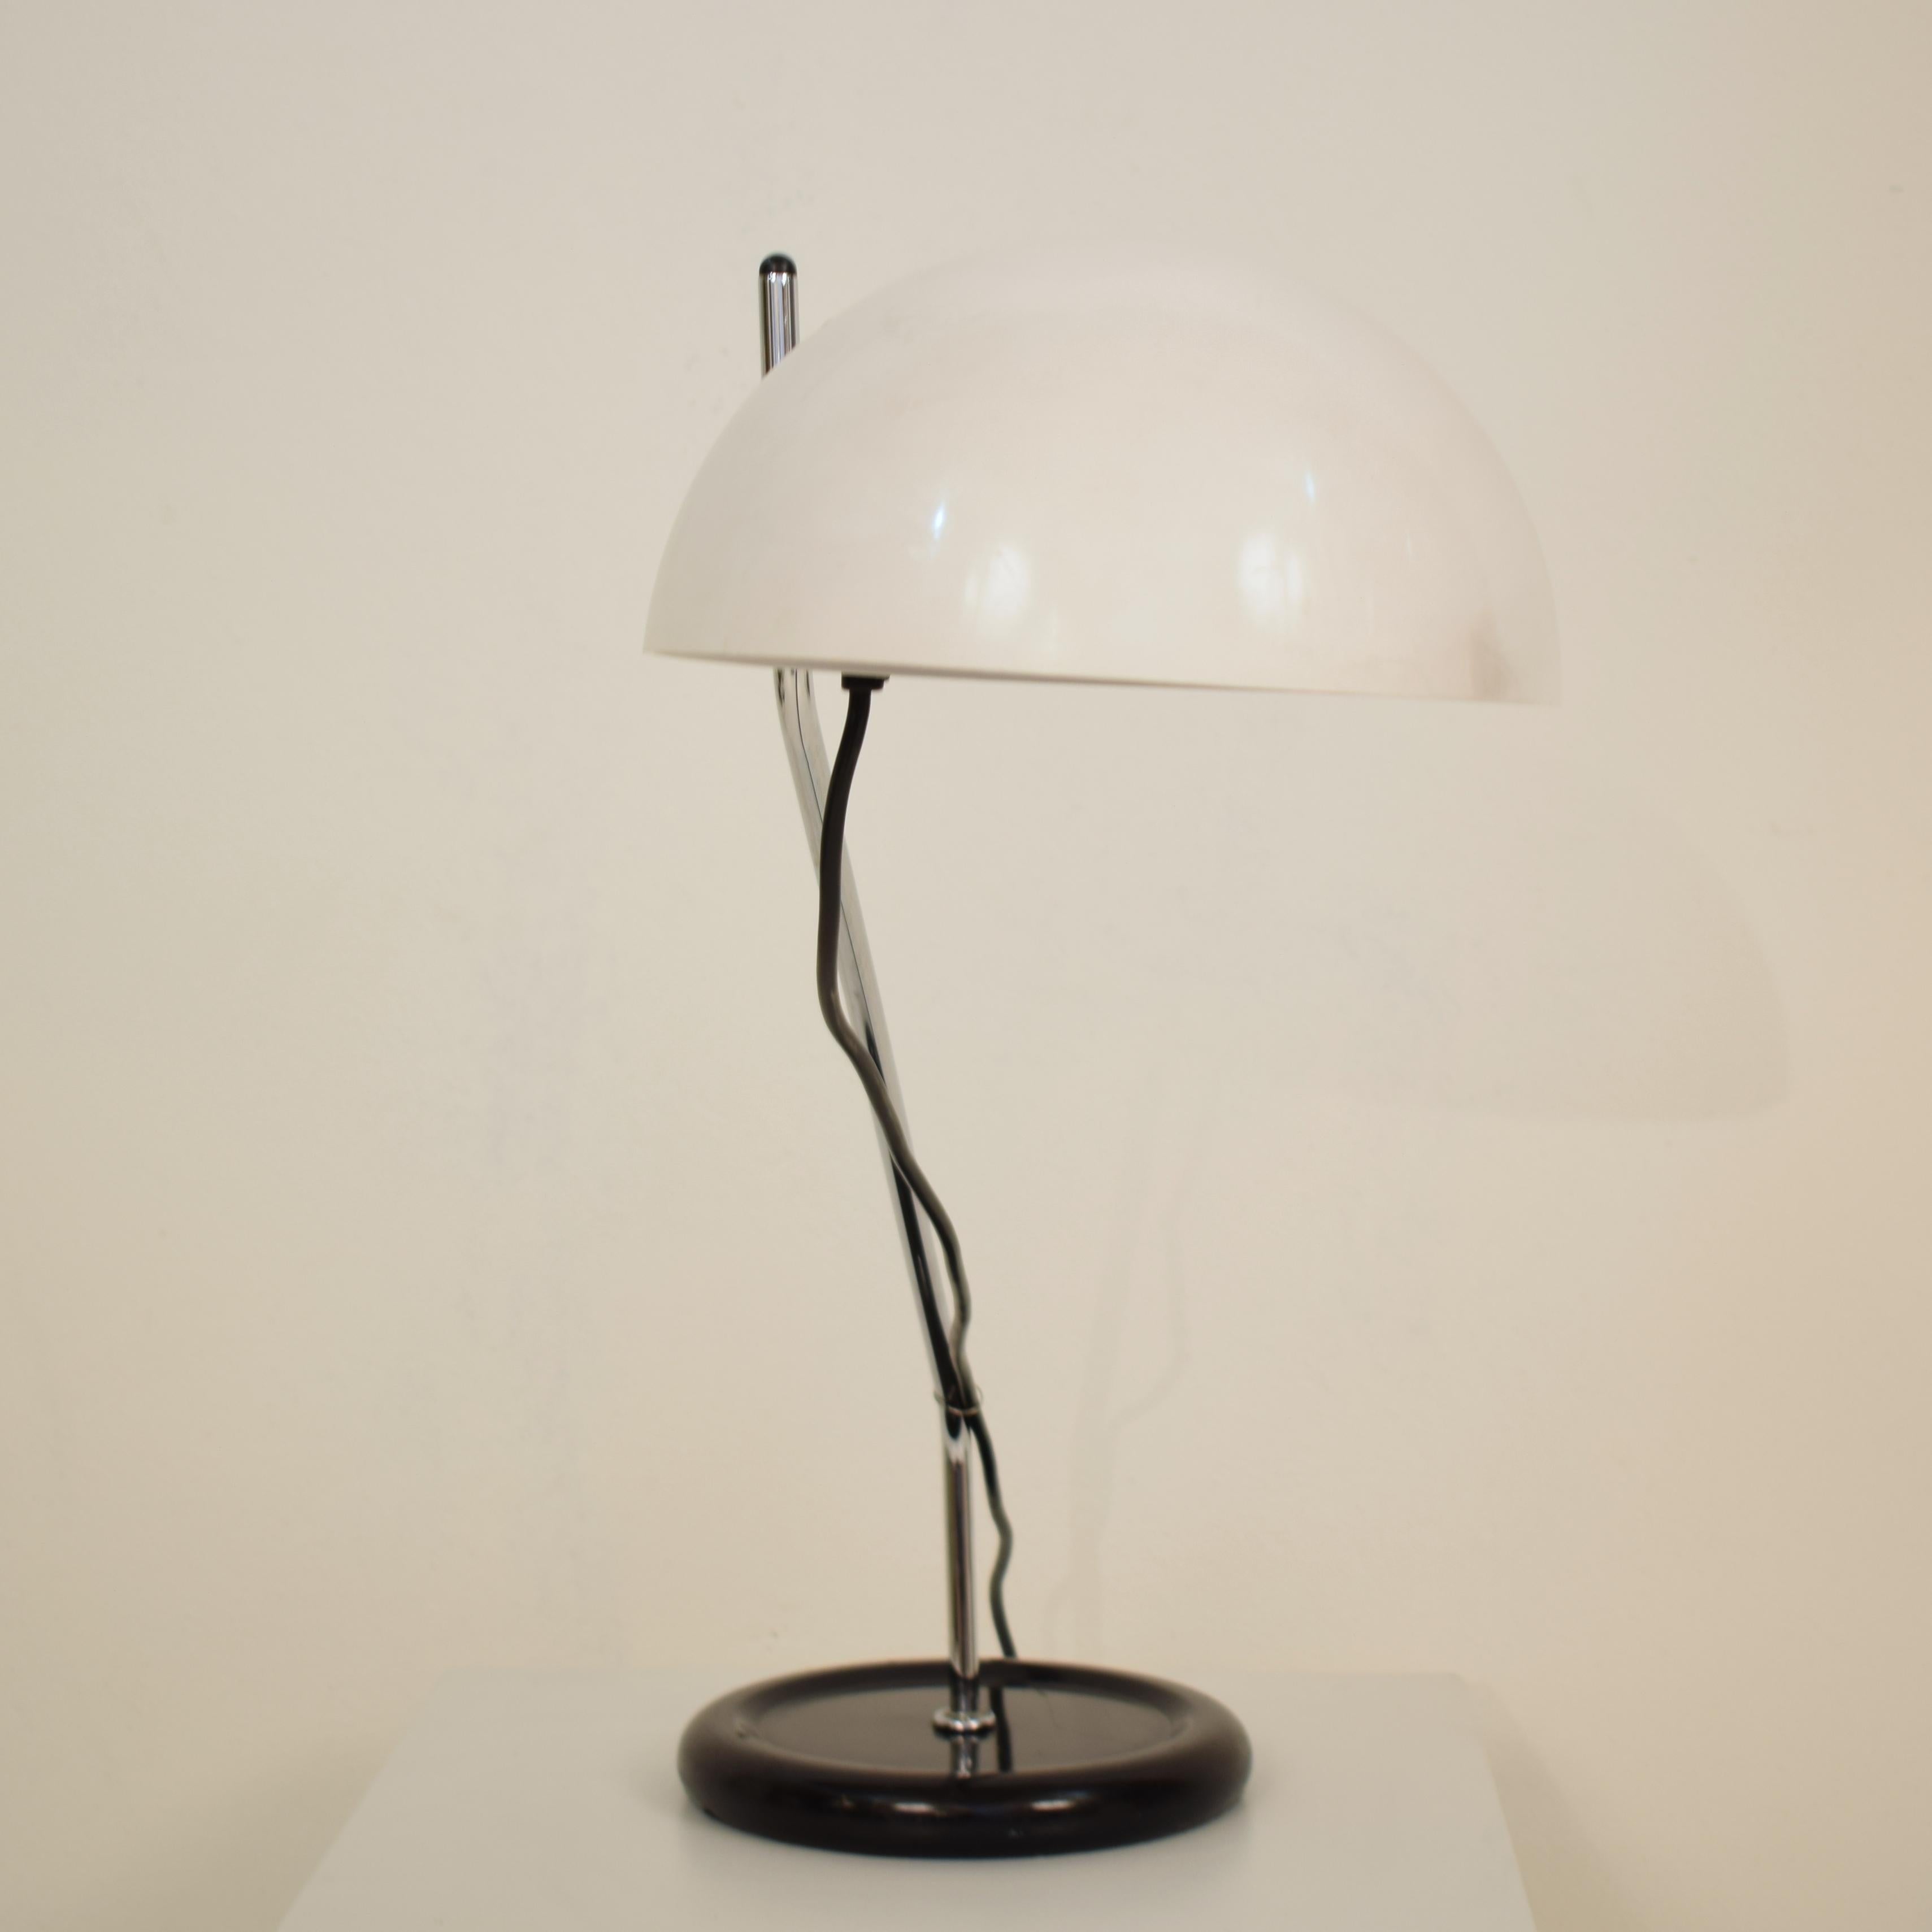 Midcentury Black and White Table Lamp Model Libellula by Harvey Guzzini, 1970s For Sale 3